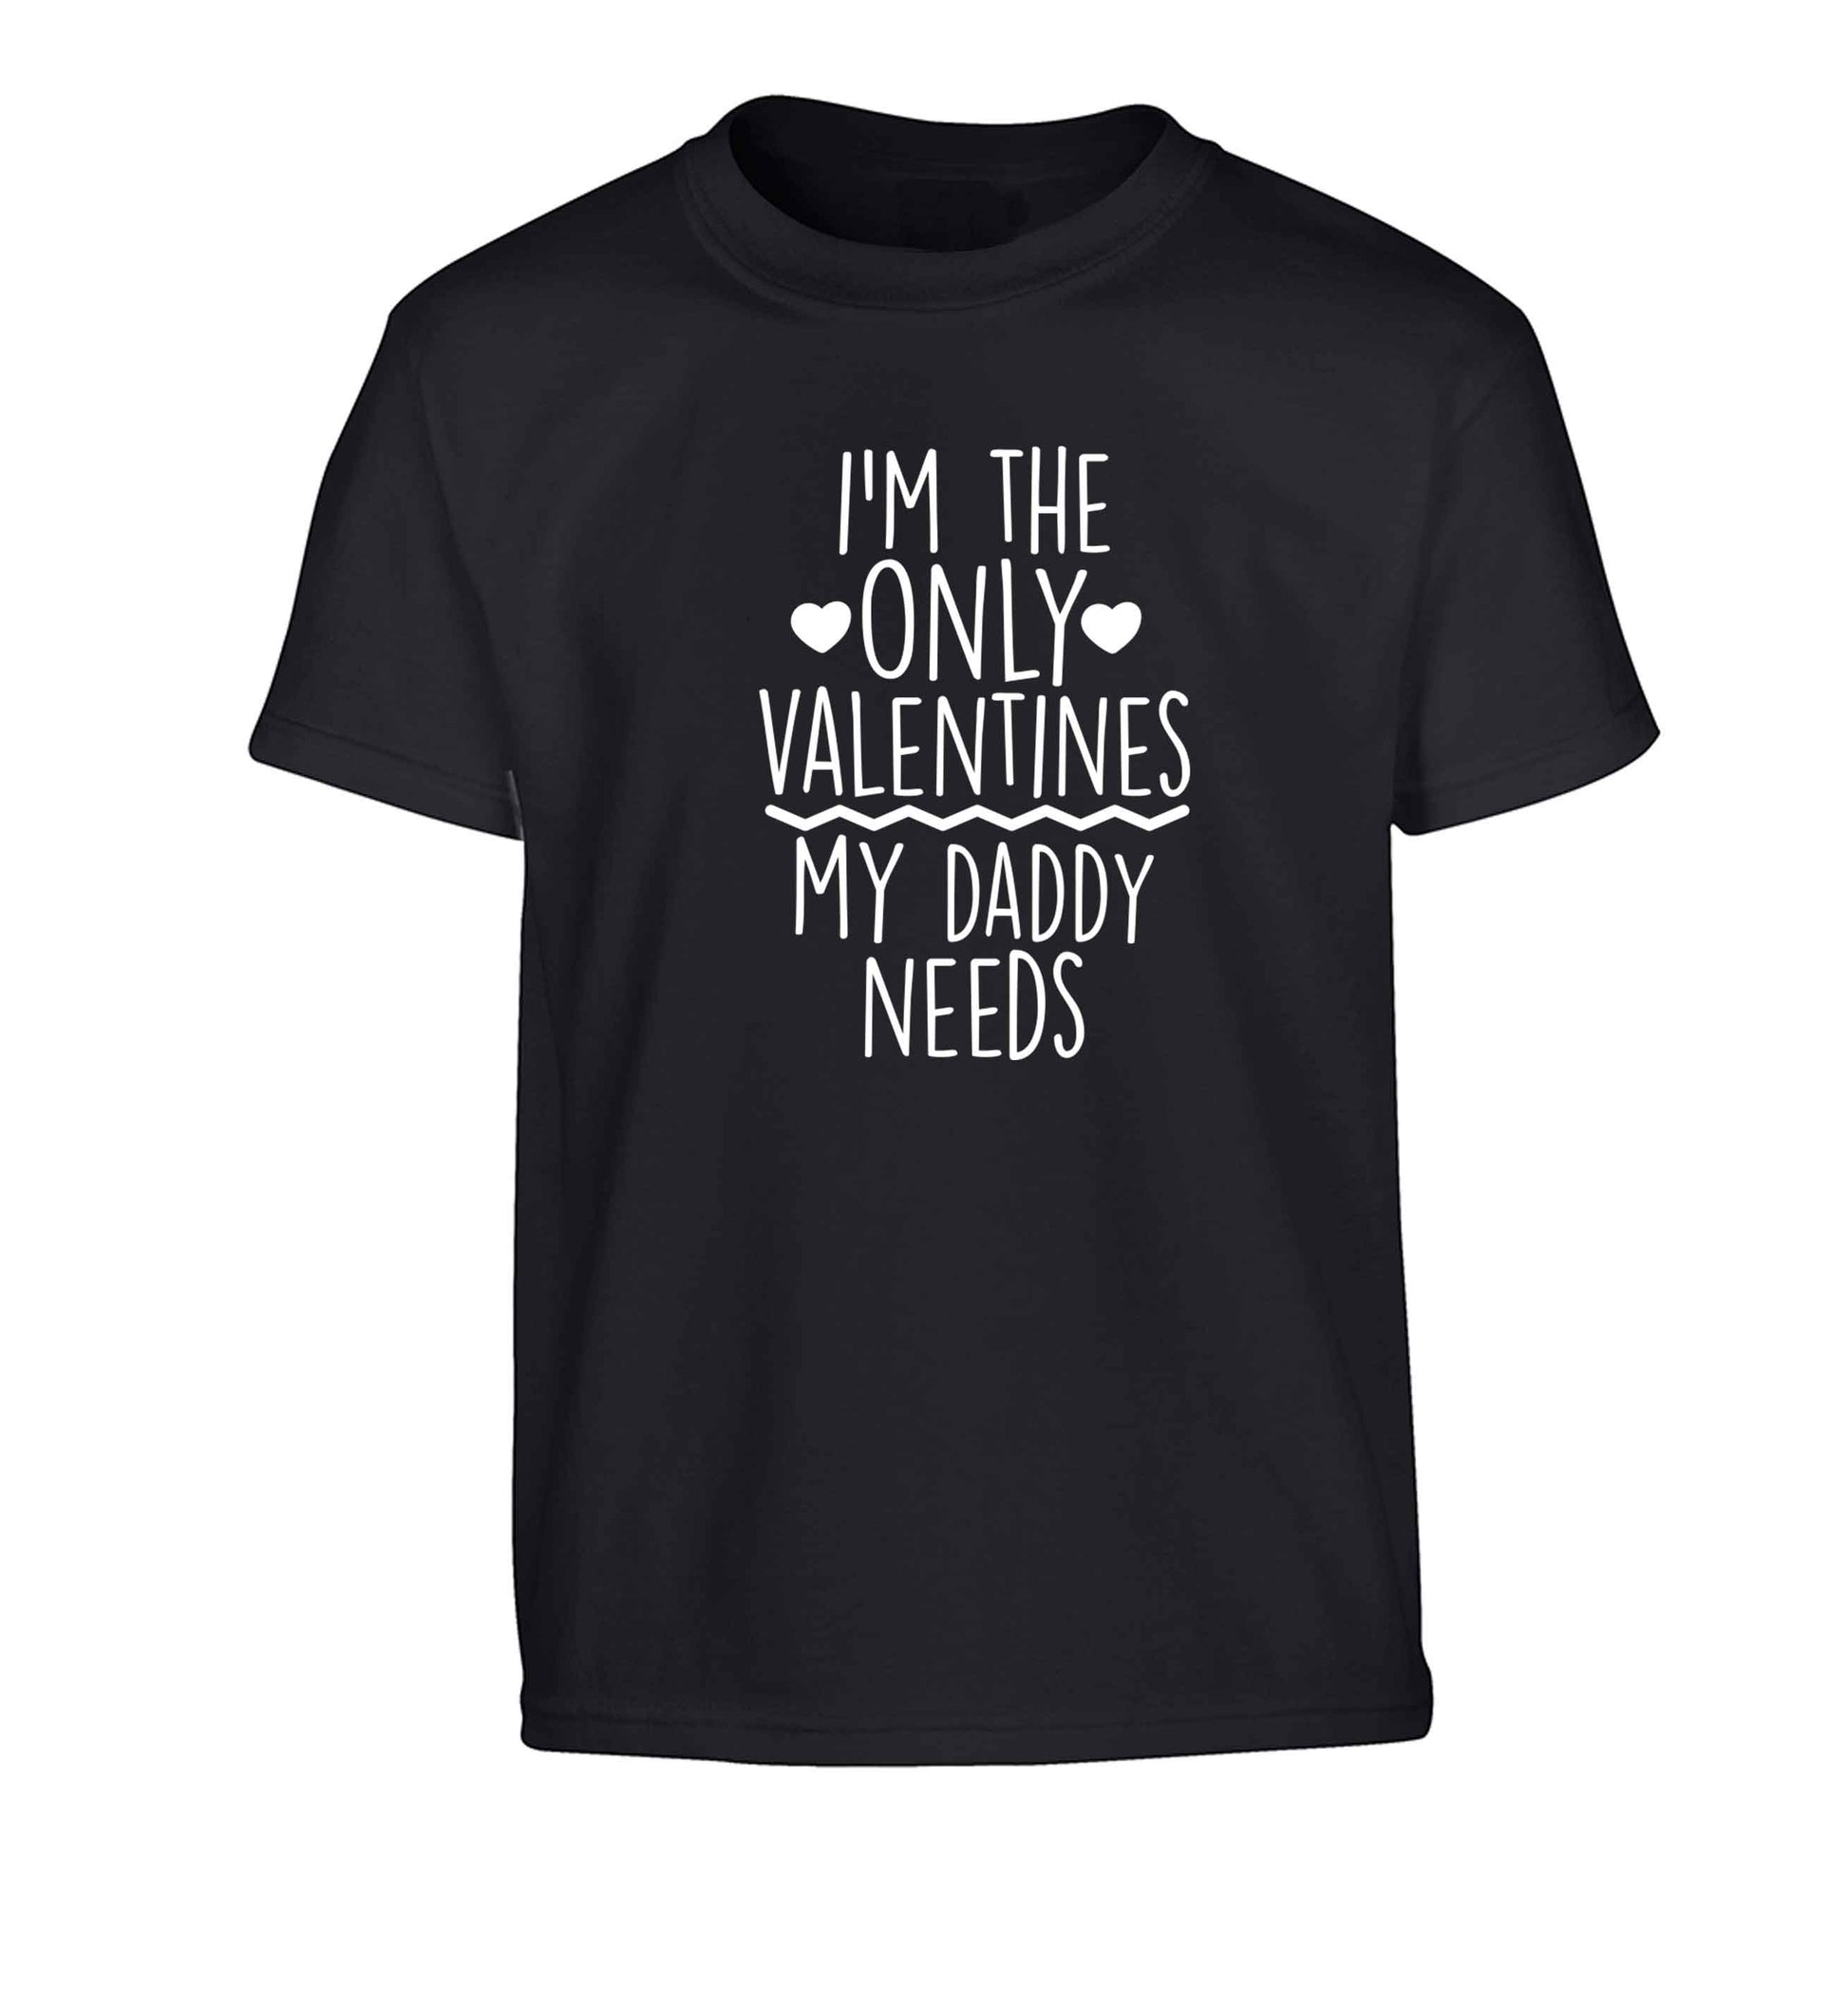 I'm the only valentines my daddy needs Children's black Tshirt 12-13 Years